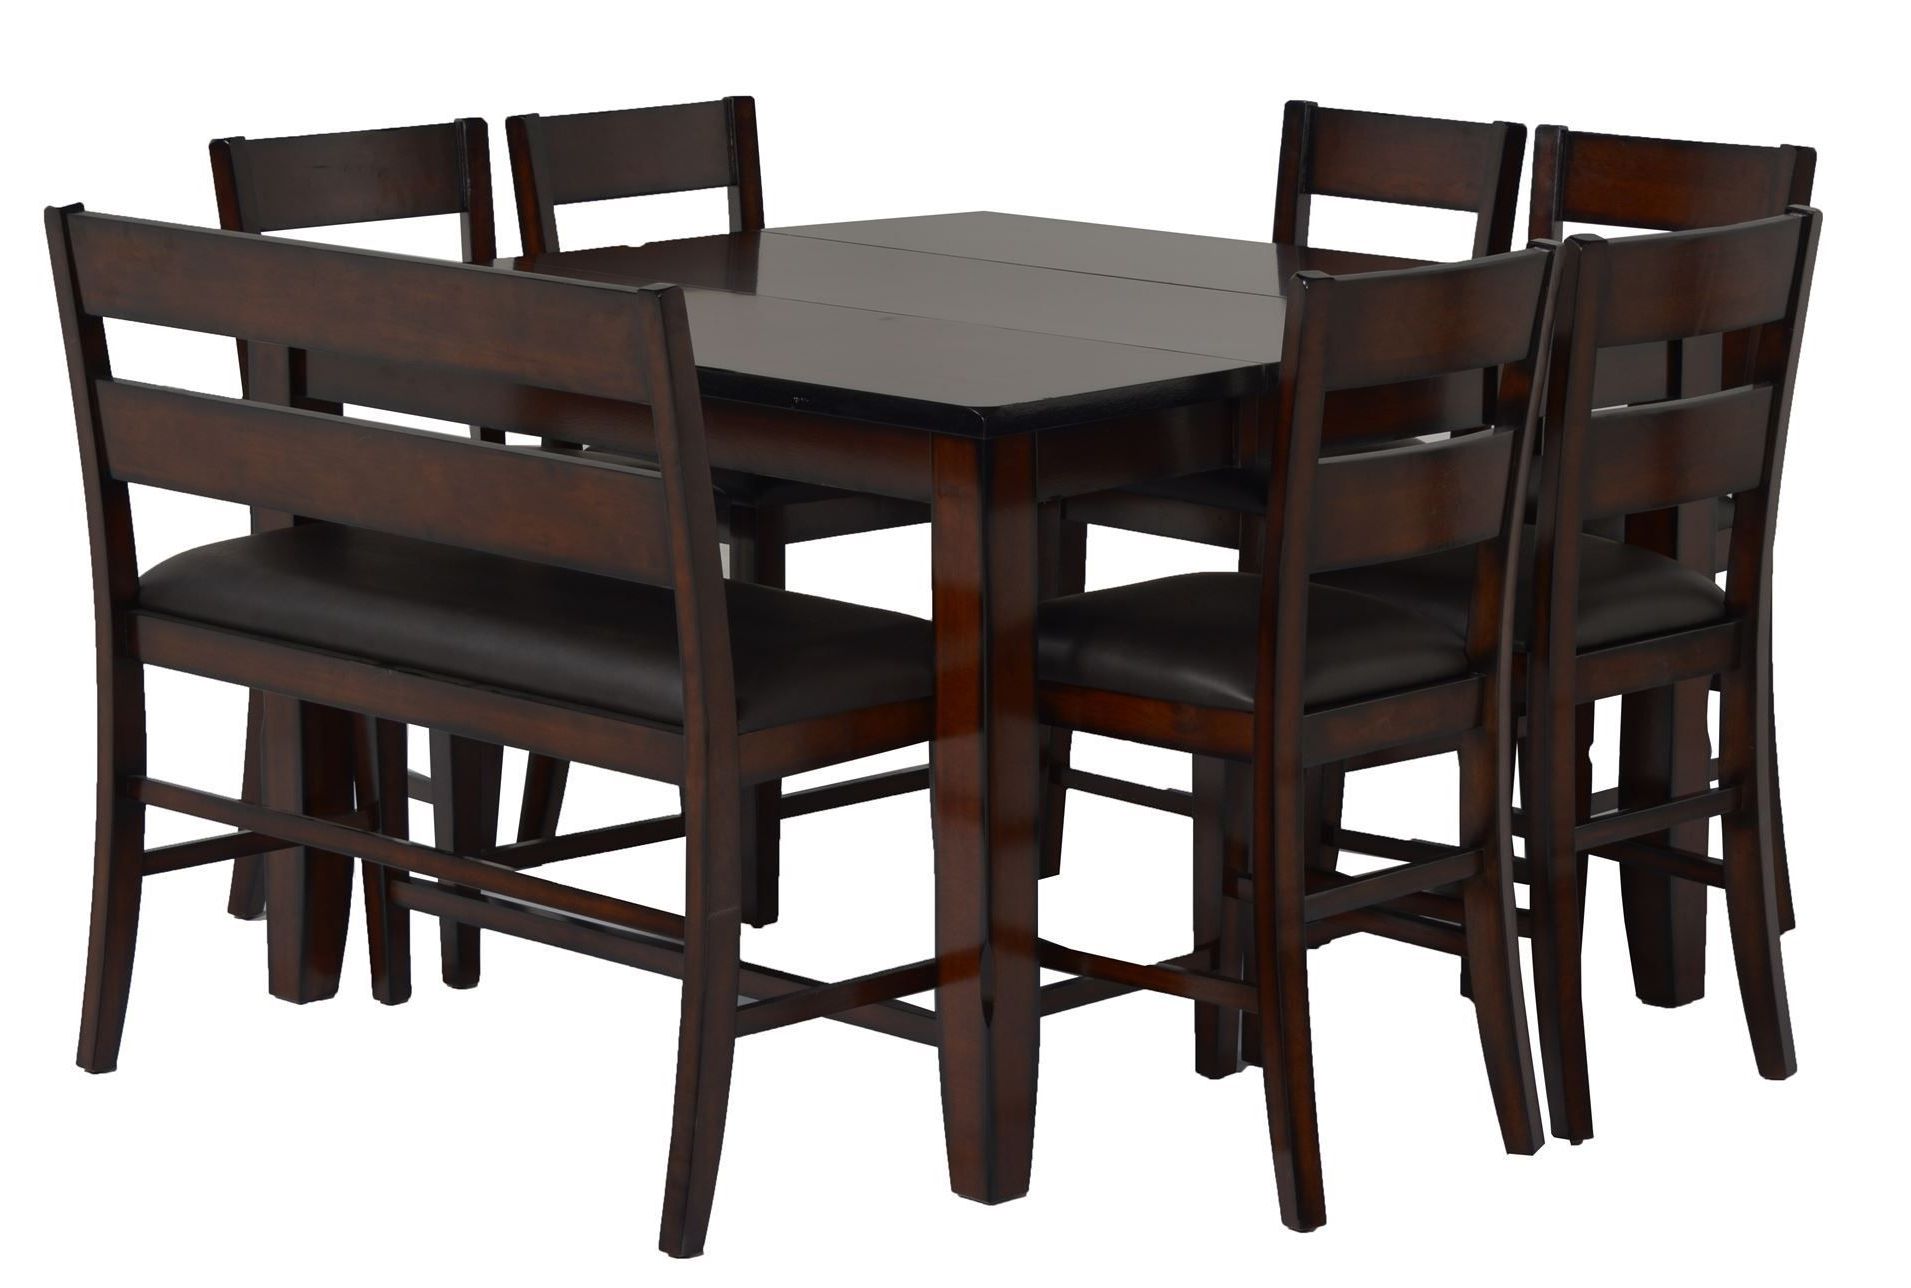 Trendy Rocco 7 Piece Extension Dining Sets With Regard To 8 Piece Extension Counter Set, Rocco, Espresso, Kitchen & Dining (View 6 of 25)